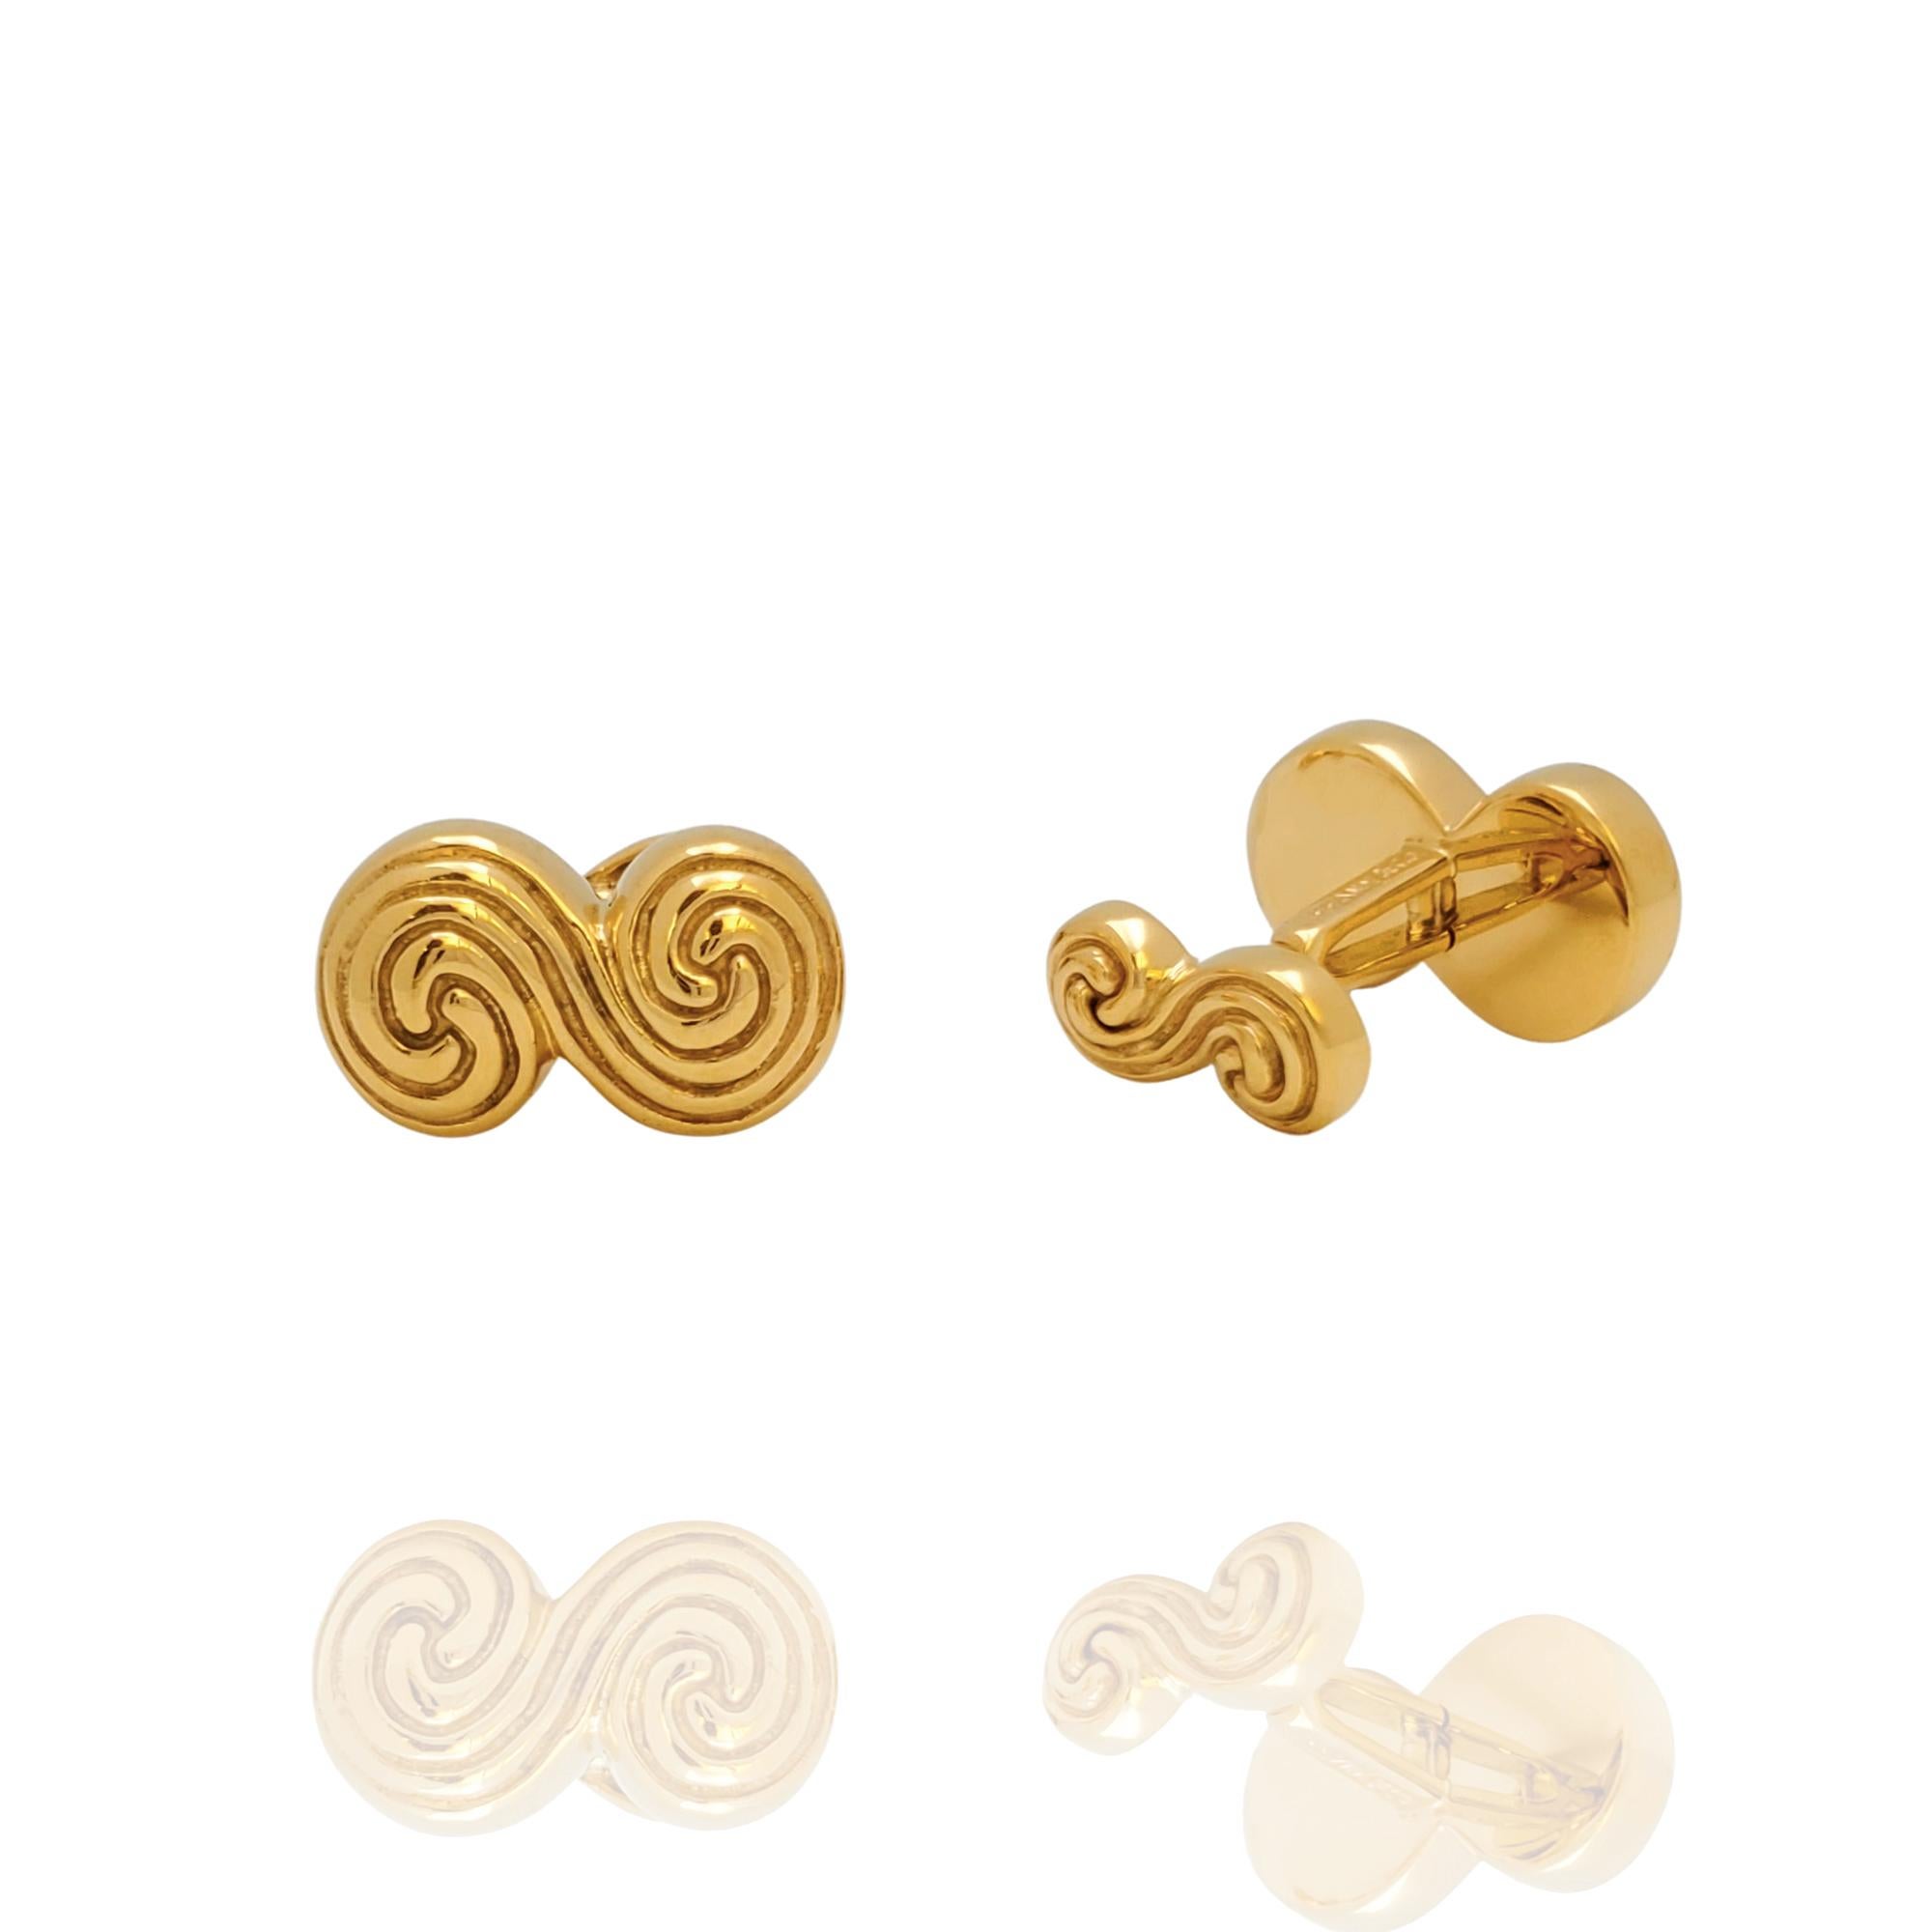 Authentic Tiffany & Co. Spiro Swirl cufflinks crafted in 18 karat yellow gold. These classic cufflinks are designed with deep grooves in the form of the letter S. Signed Tiffany & Co., 750, 1995. The cufflinks are presented with Tiffany & Co. pouch,